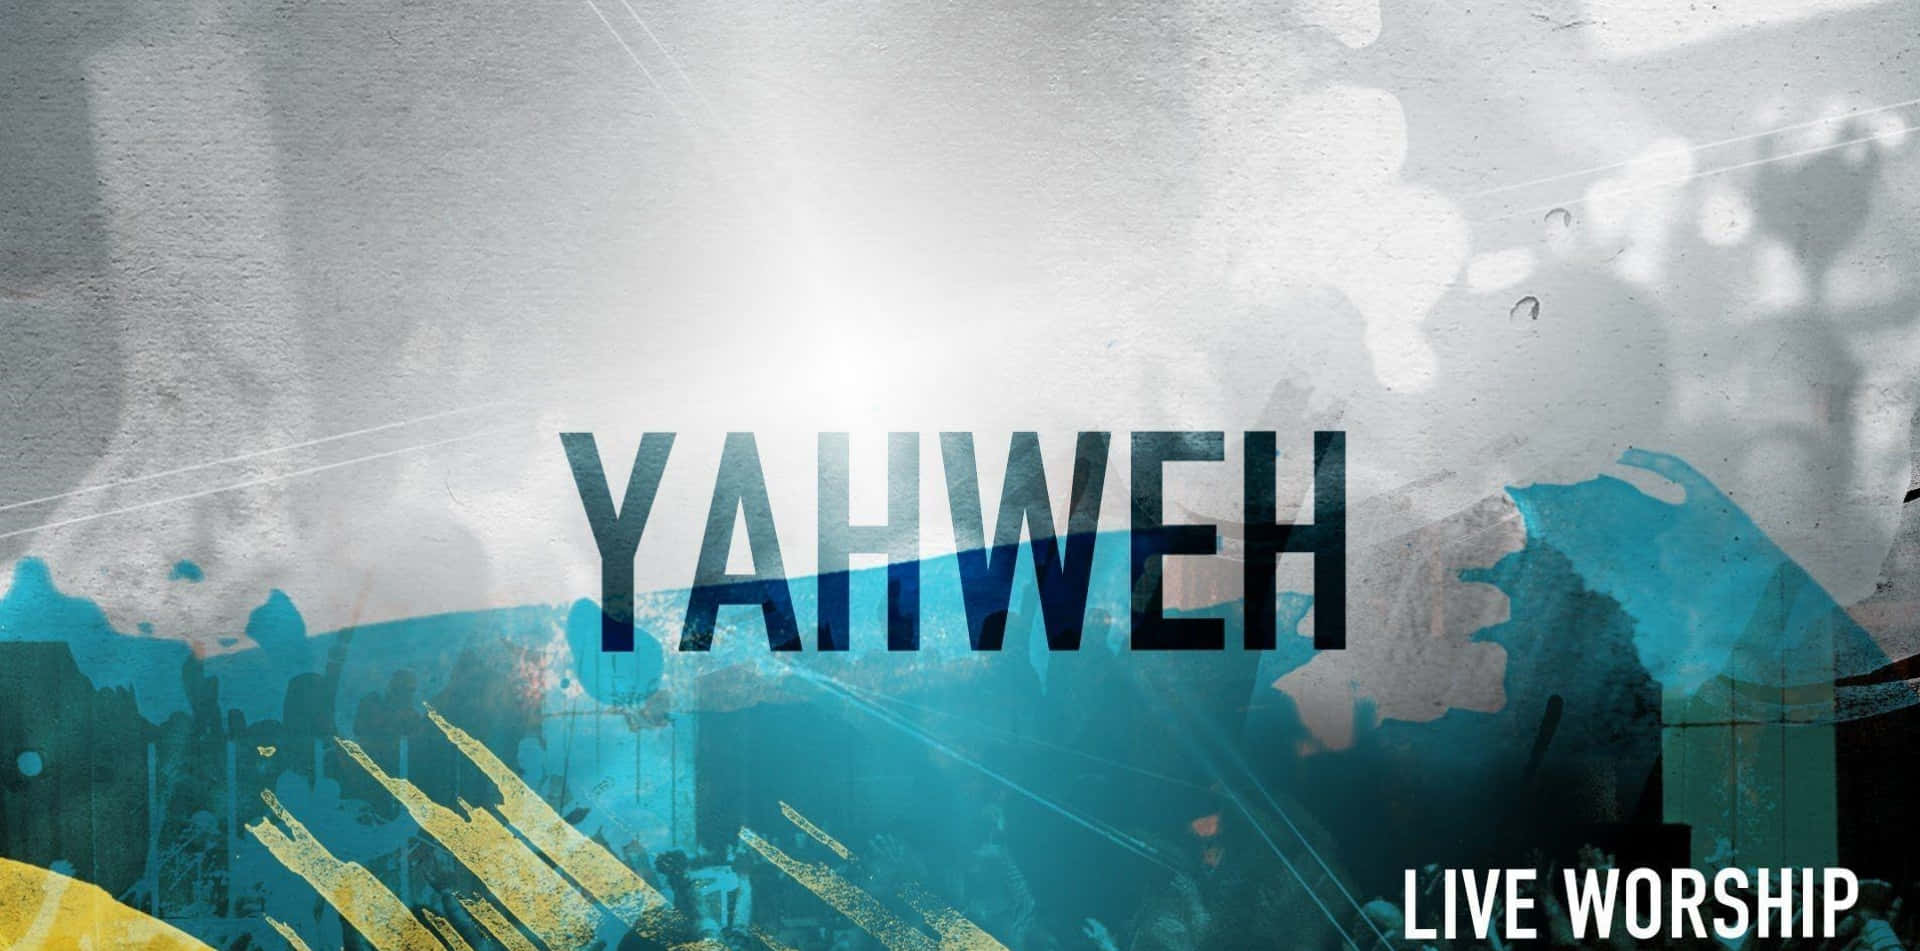 "The Power of Yahweh"